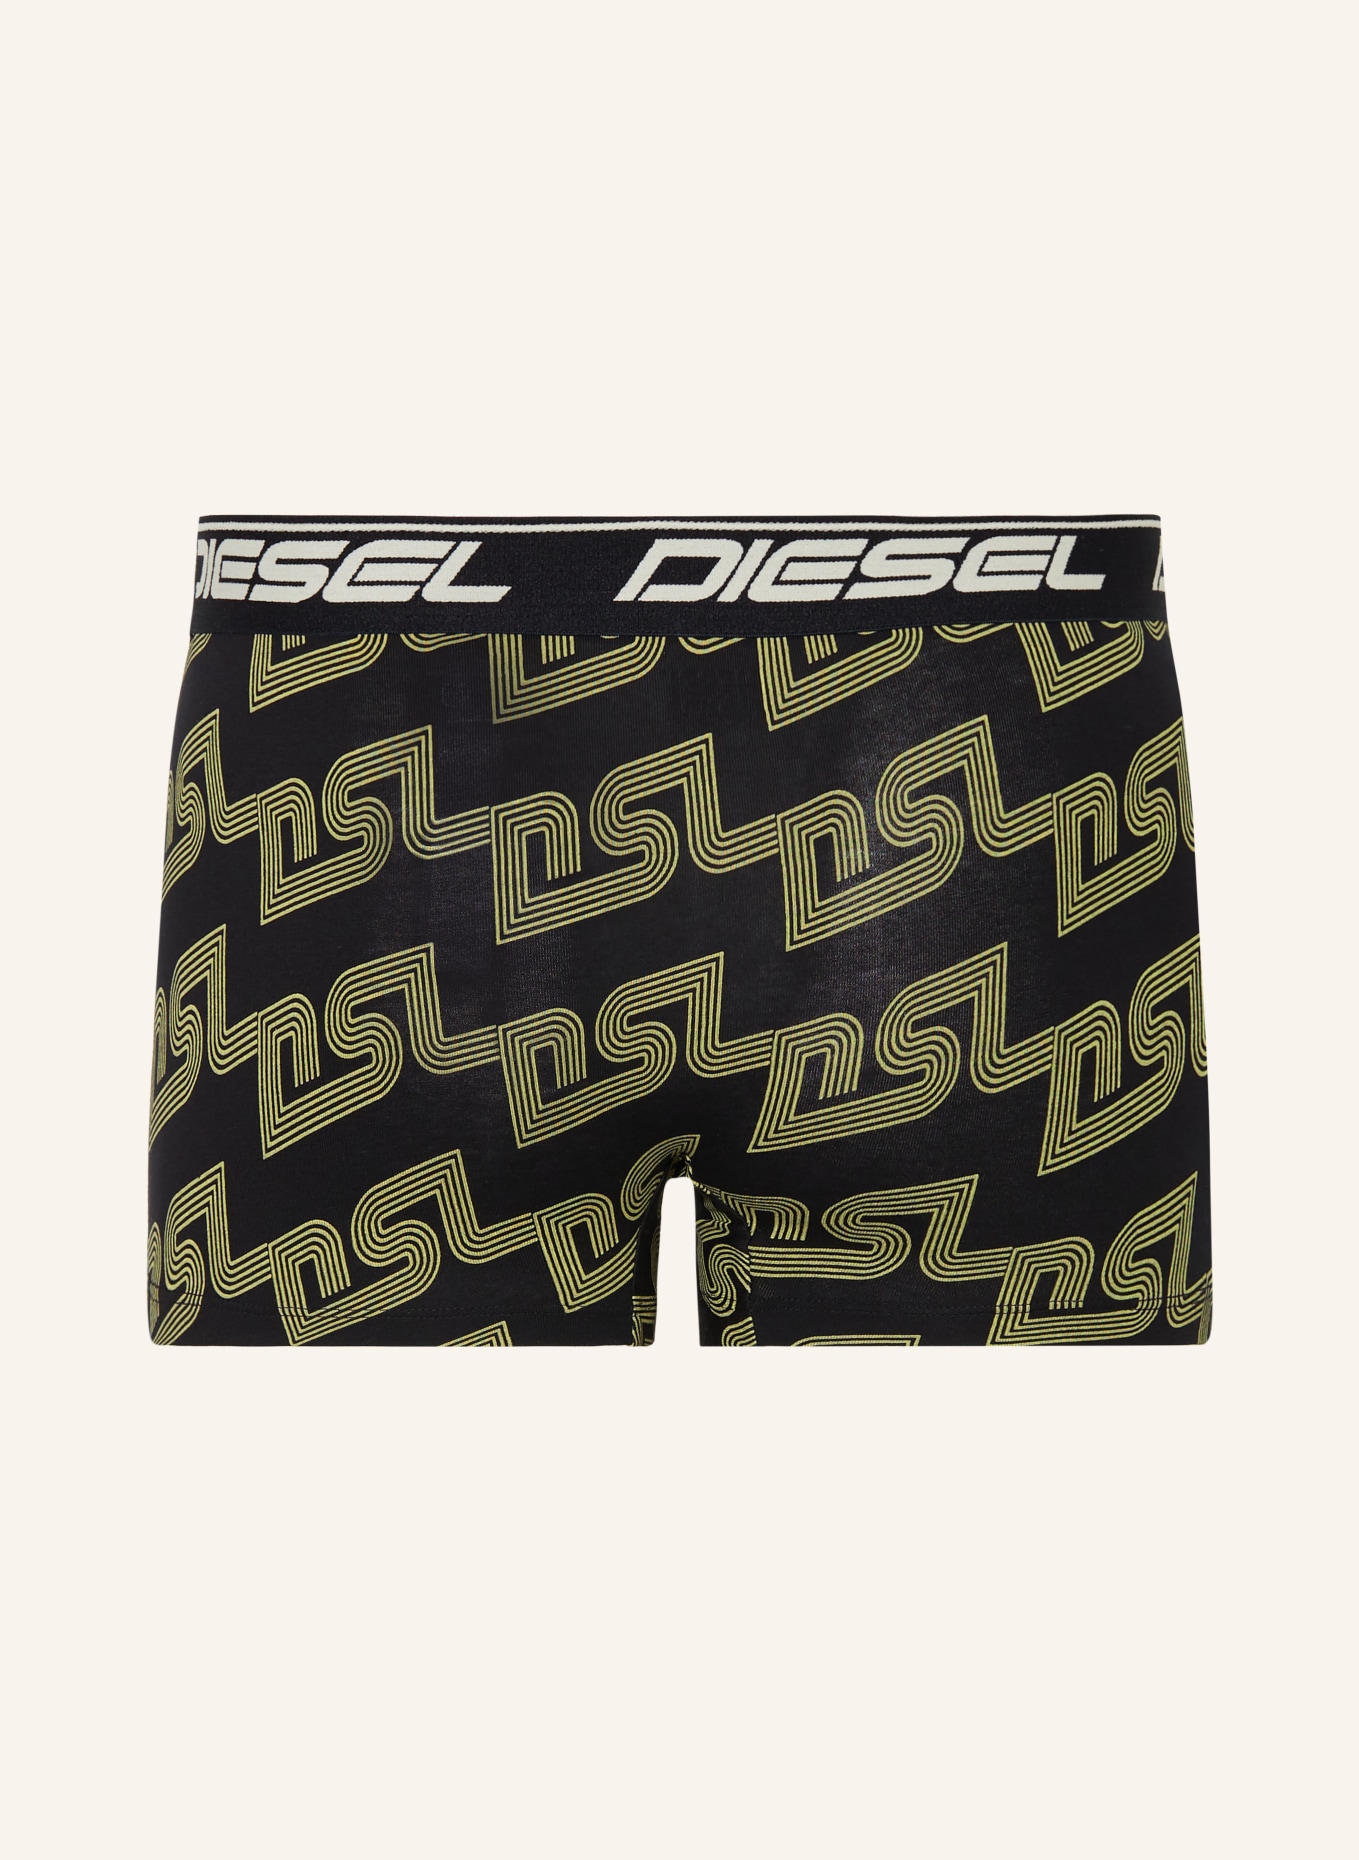 DIESEL 3-pack boxer shorts DAMIEN, Color: BLACK/ WHITE/ YELLOW (Image 2)